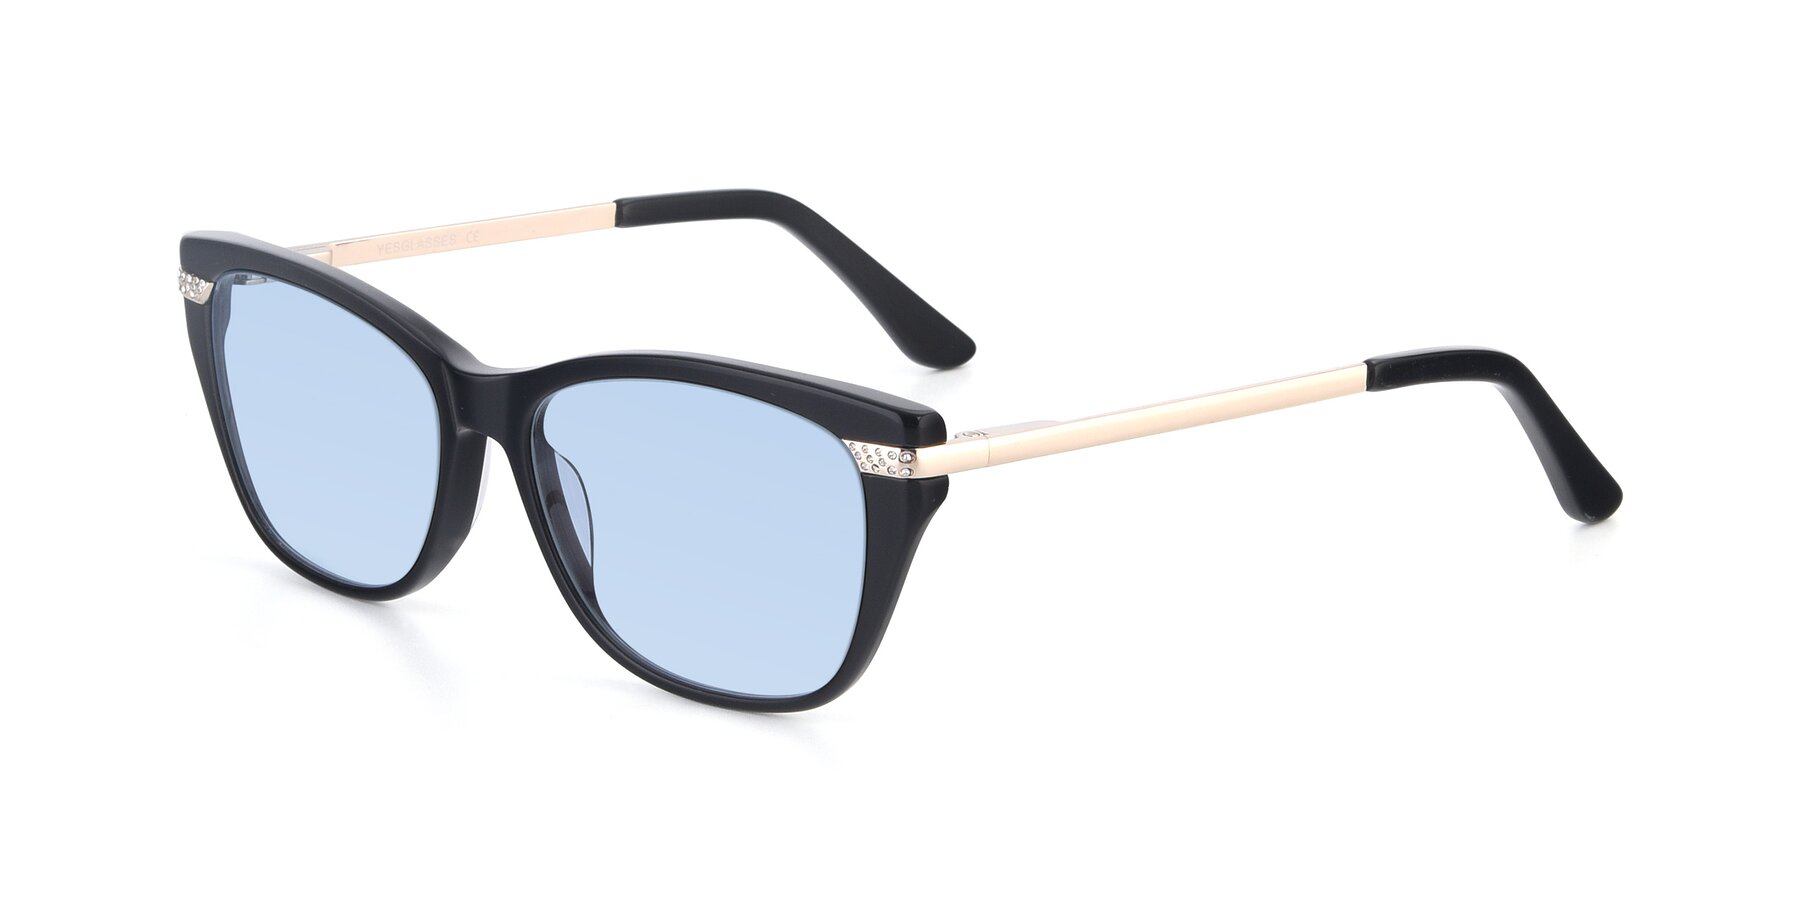 Angle of 17515 in Black with Light Blue Tinted Lenses